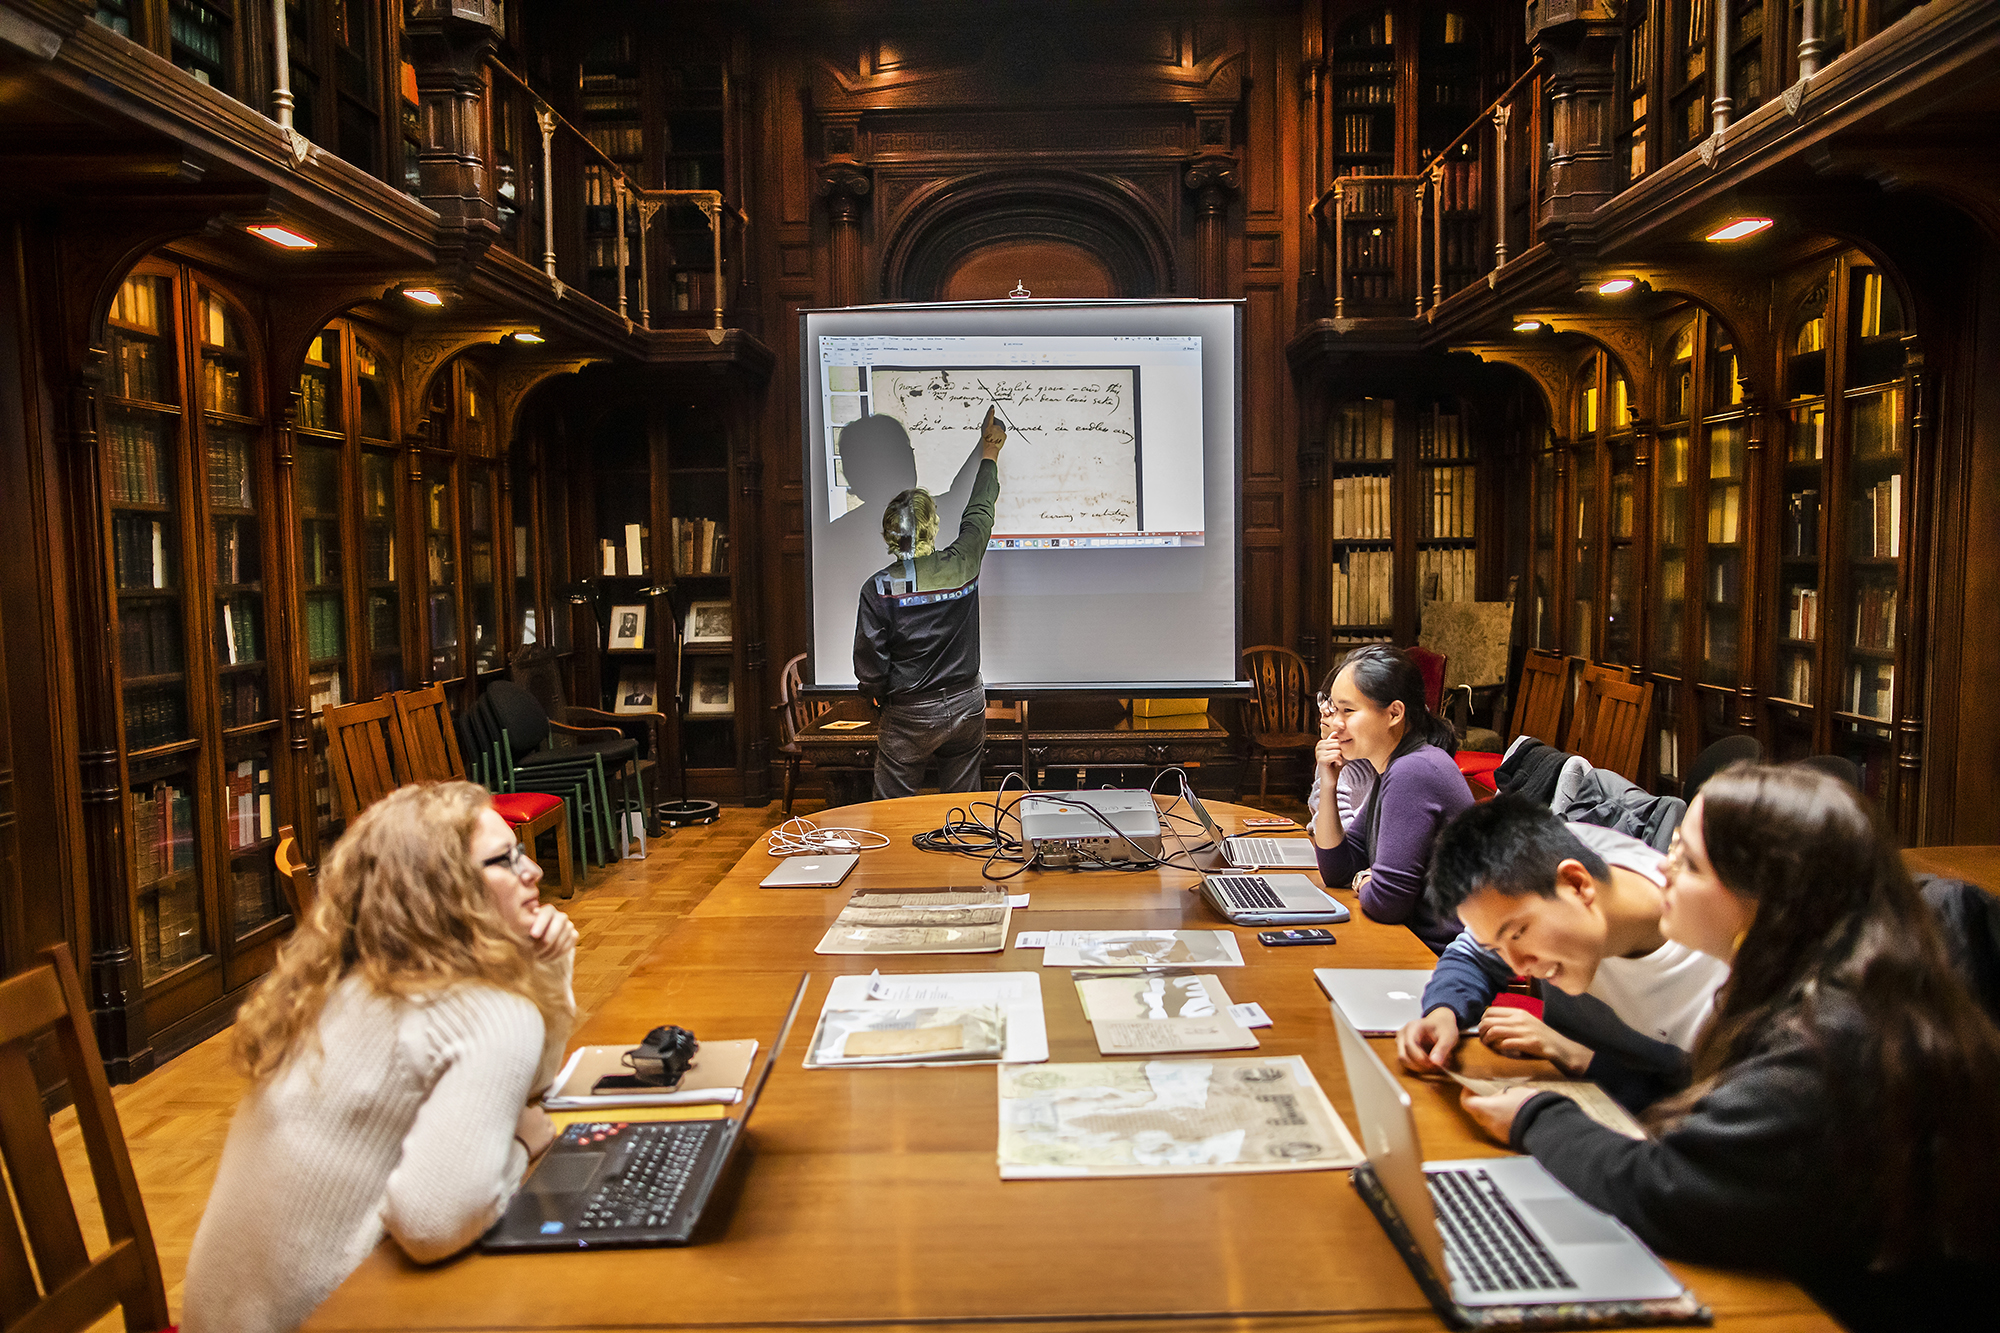 Professor pointing to handwritten words on document projected on screen in library with five students around long wooden table.